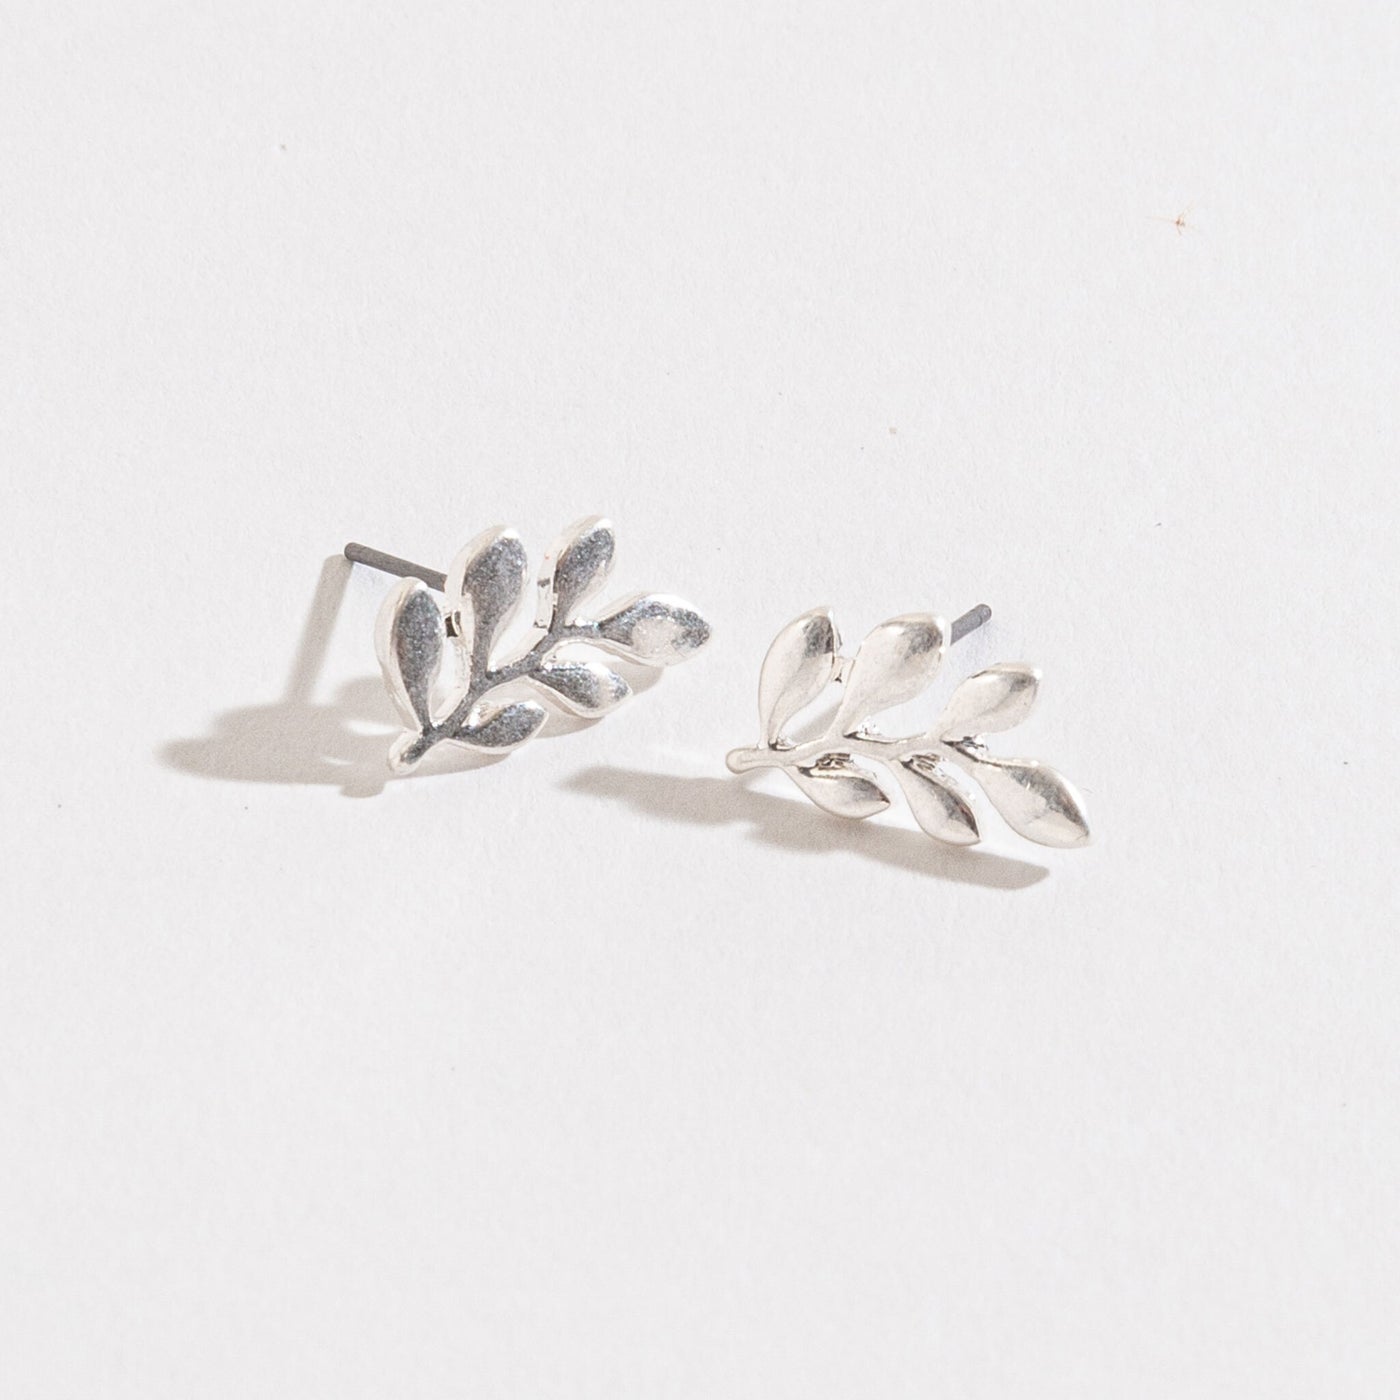 silver leaf stud earrings on a white background